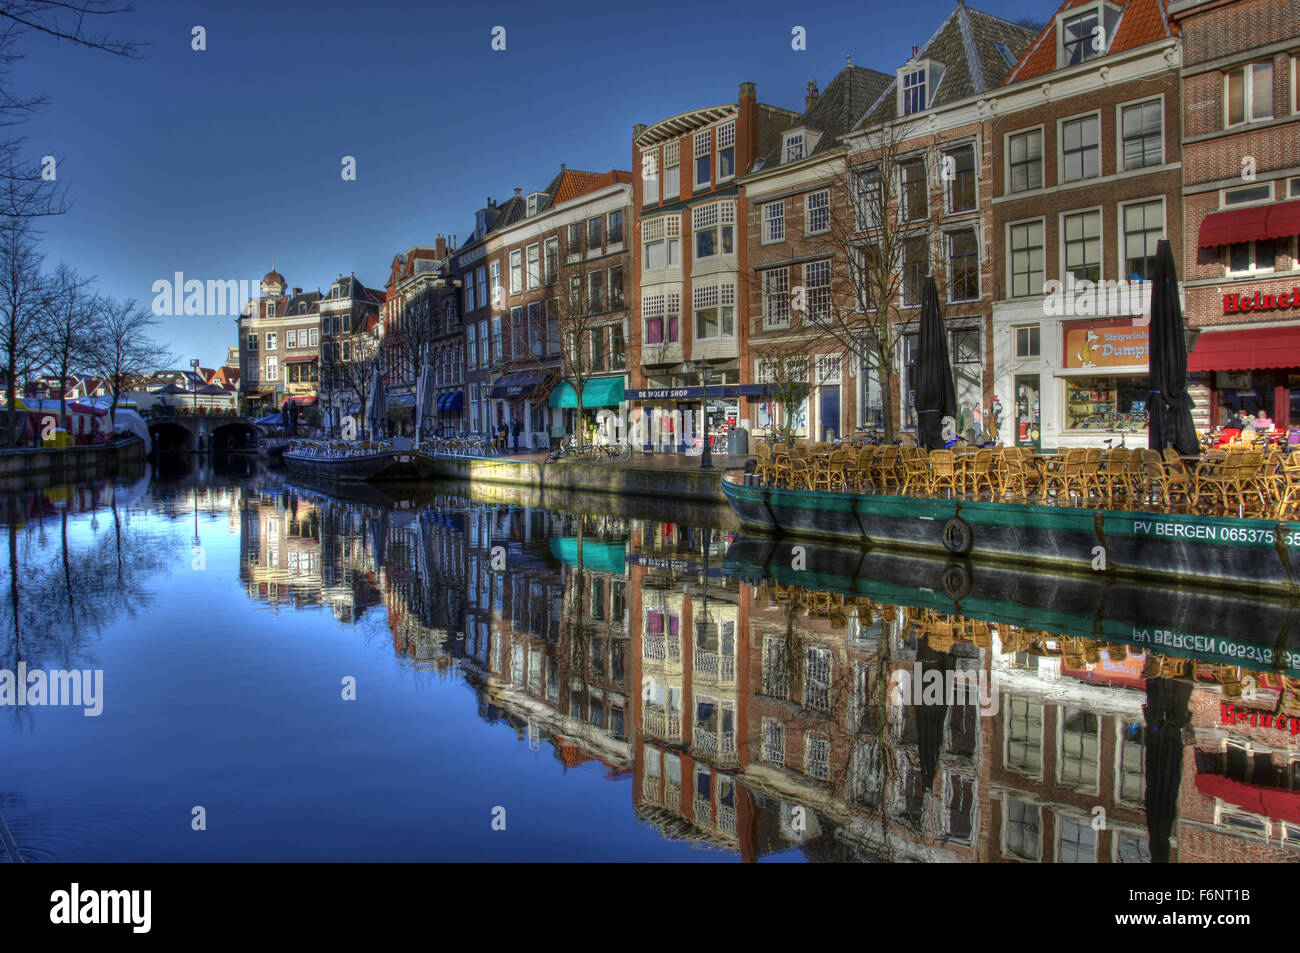 Leiden canal reflection of buildings and sky Stock Photo